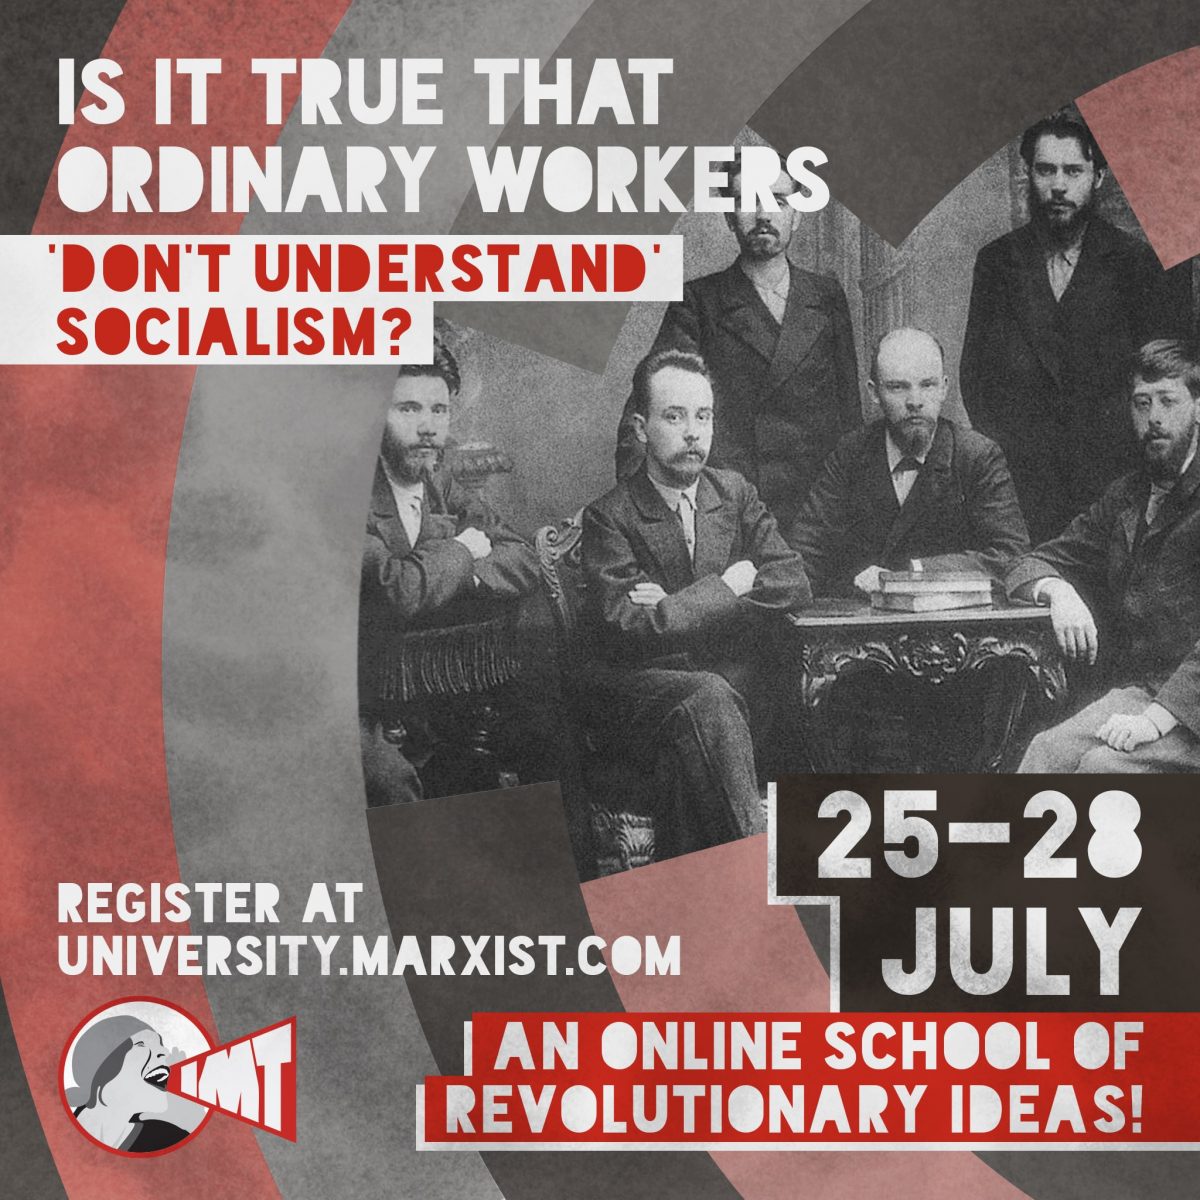 Class struggle and small circle mentality - Marxism vs. sectarianism